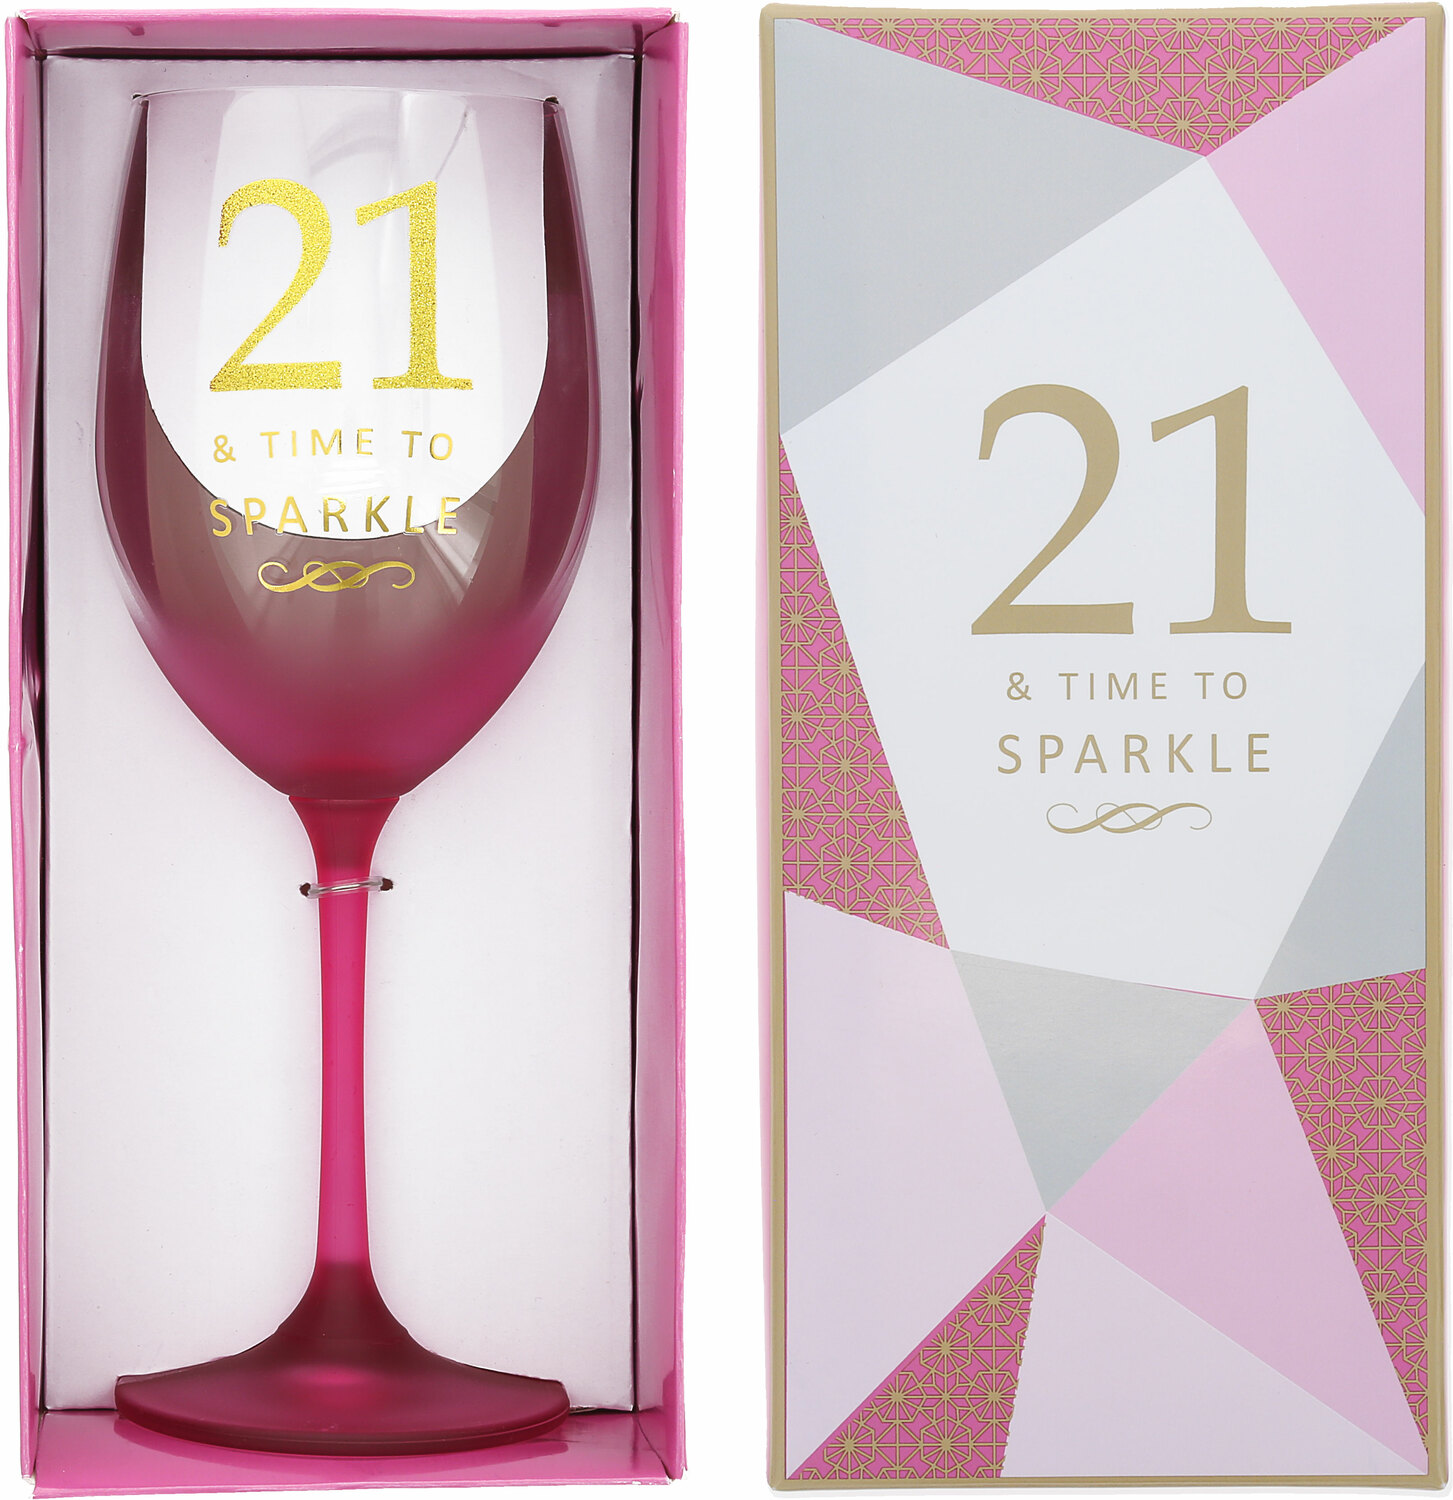 21 by Outpouring of Love - 21 - Gift Boxed 19 oz Crystal Wine Glass